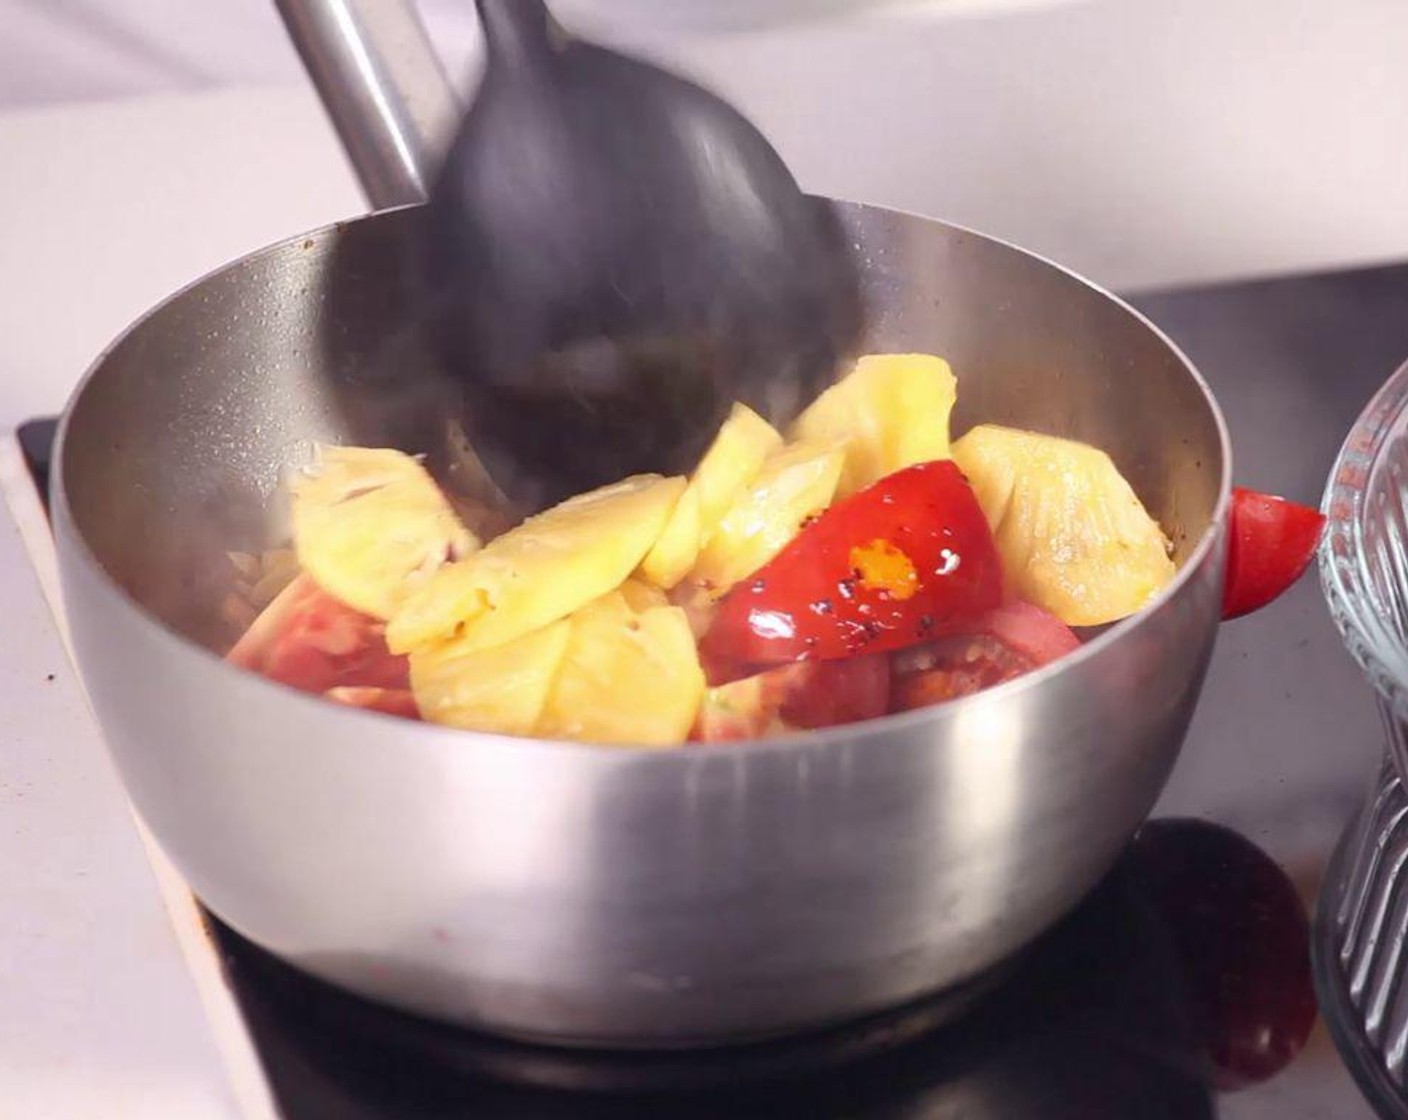 step 5 Sauté Garlic (2 cloves), Cooking Oil (2 Tbsp), add Chili Powder (1 tsp), tomato and pineapple, then pour into the soup.